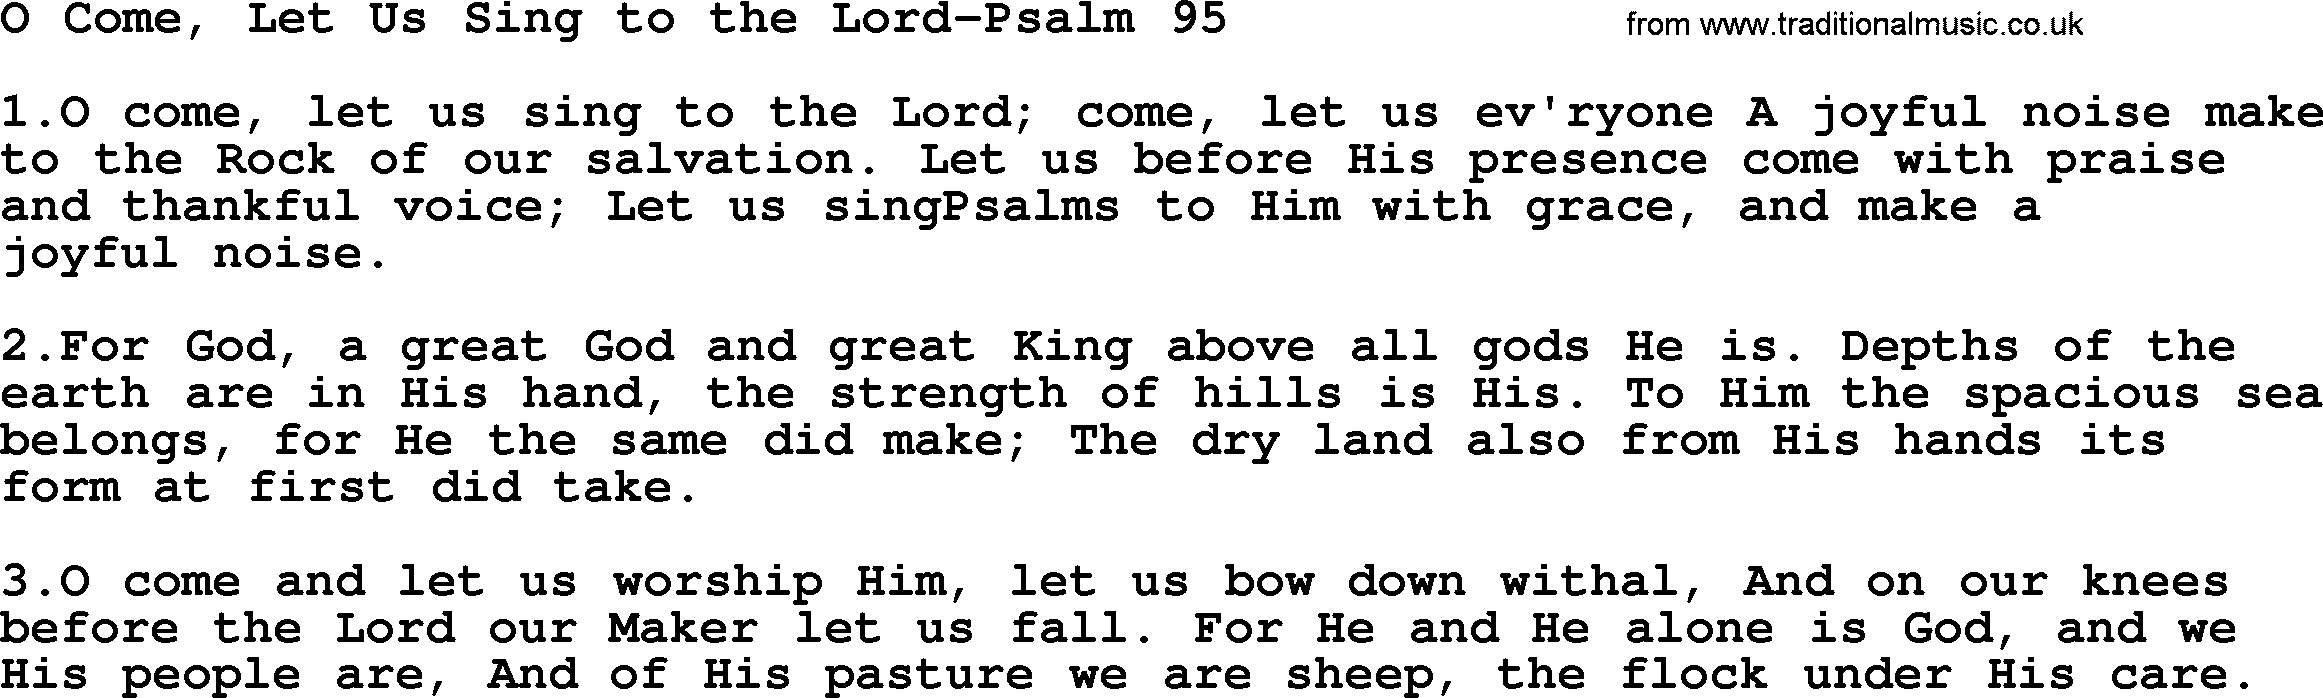 Hymns from the Psalms, Hymn: O Come, Let Us Sing To The Lord-Psalm 95, lyrics with PDF